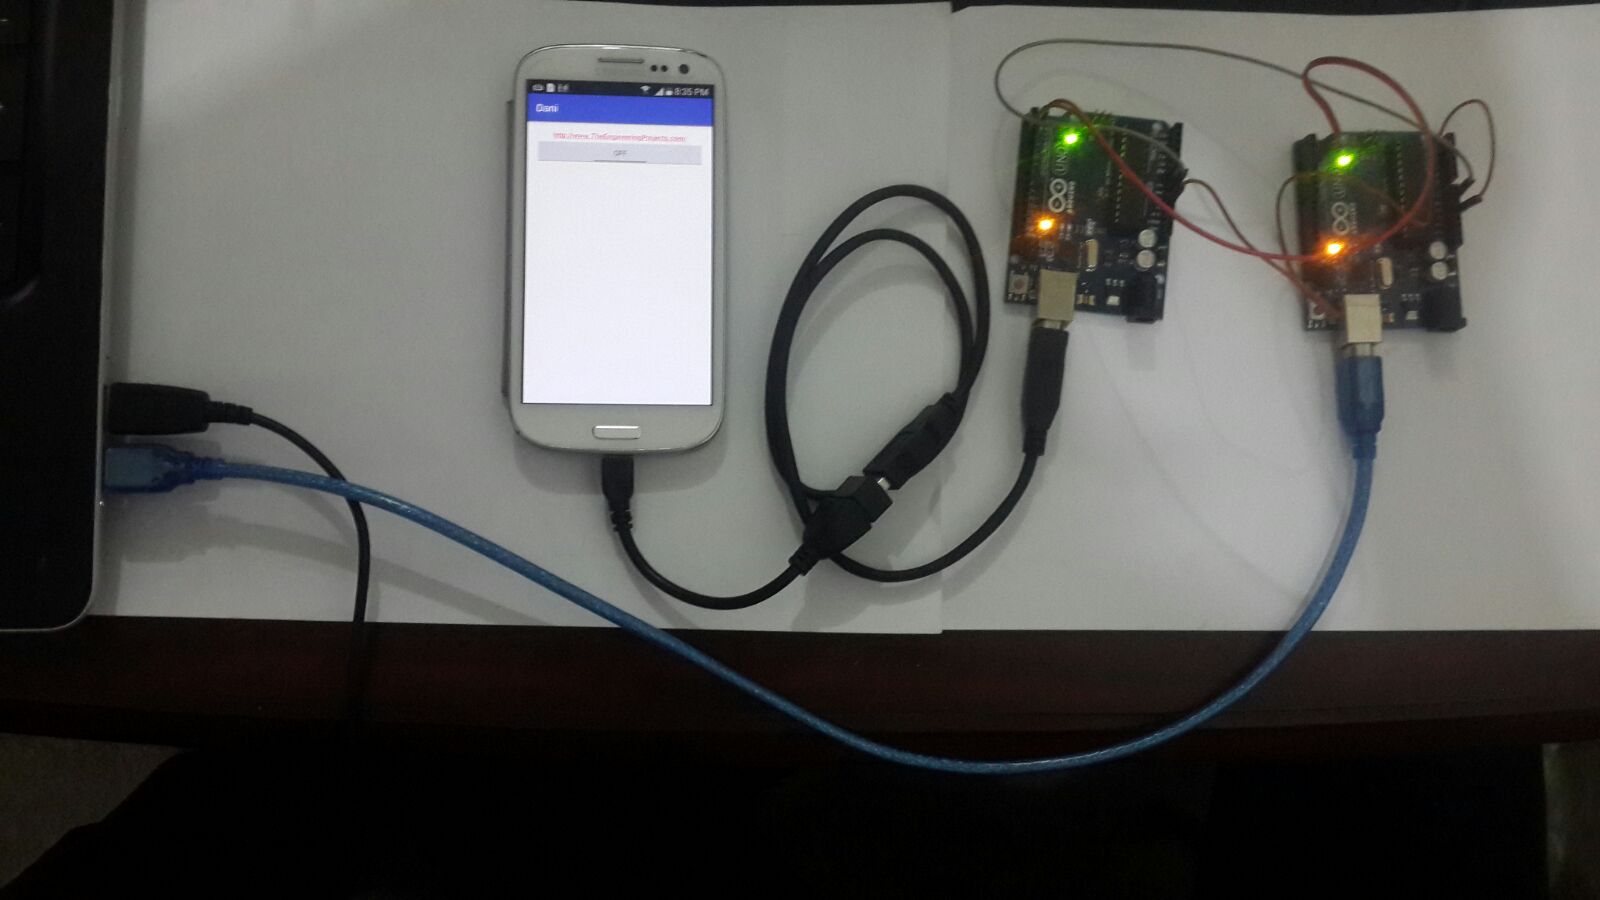 android and arduino usb communication, arduino android usb data sending, usb data communication android arduino,send data from android to arduino